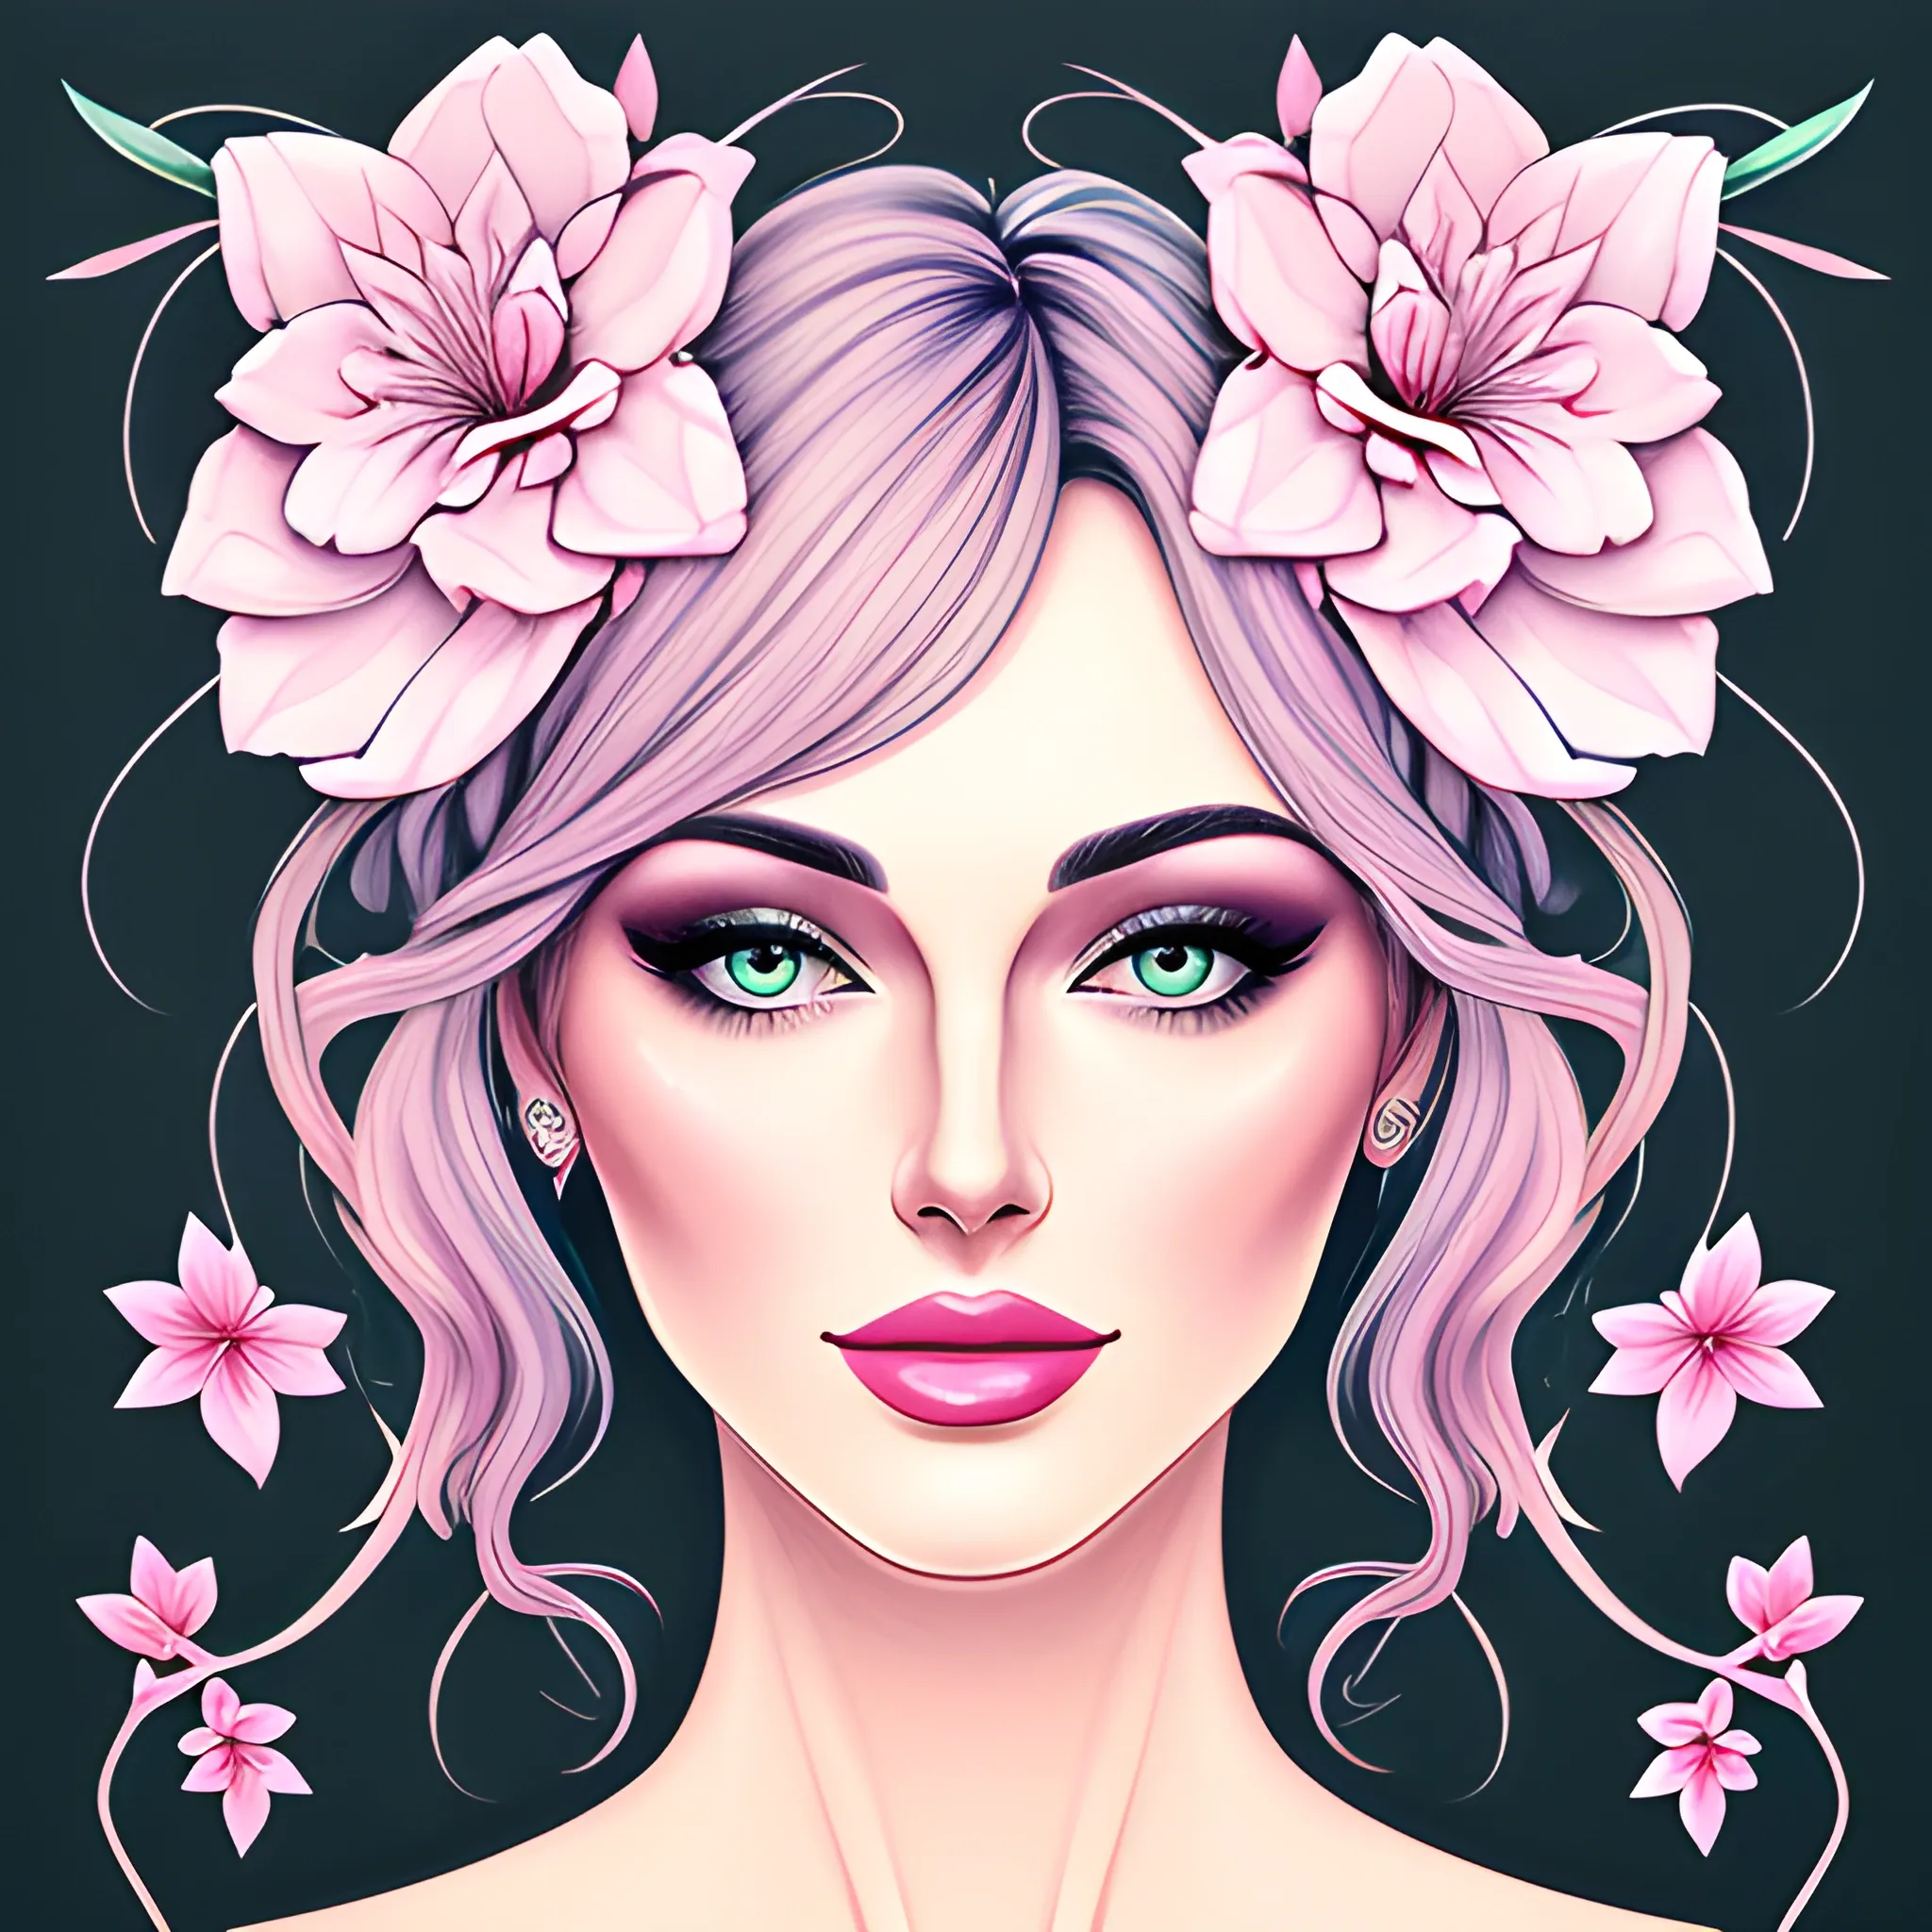 Beautiful girl, digitally drawn poster, pastel colors, portrait, delicate flowers, realism, ultra high definition image